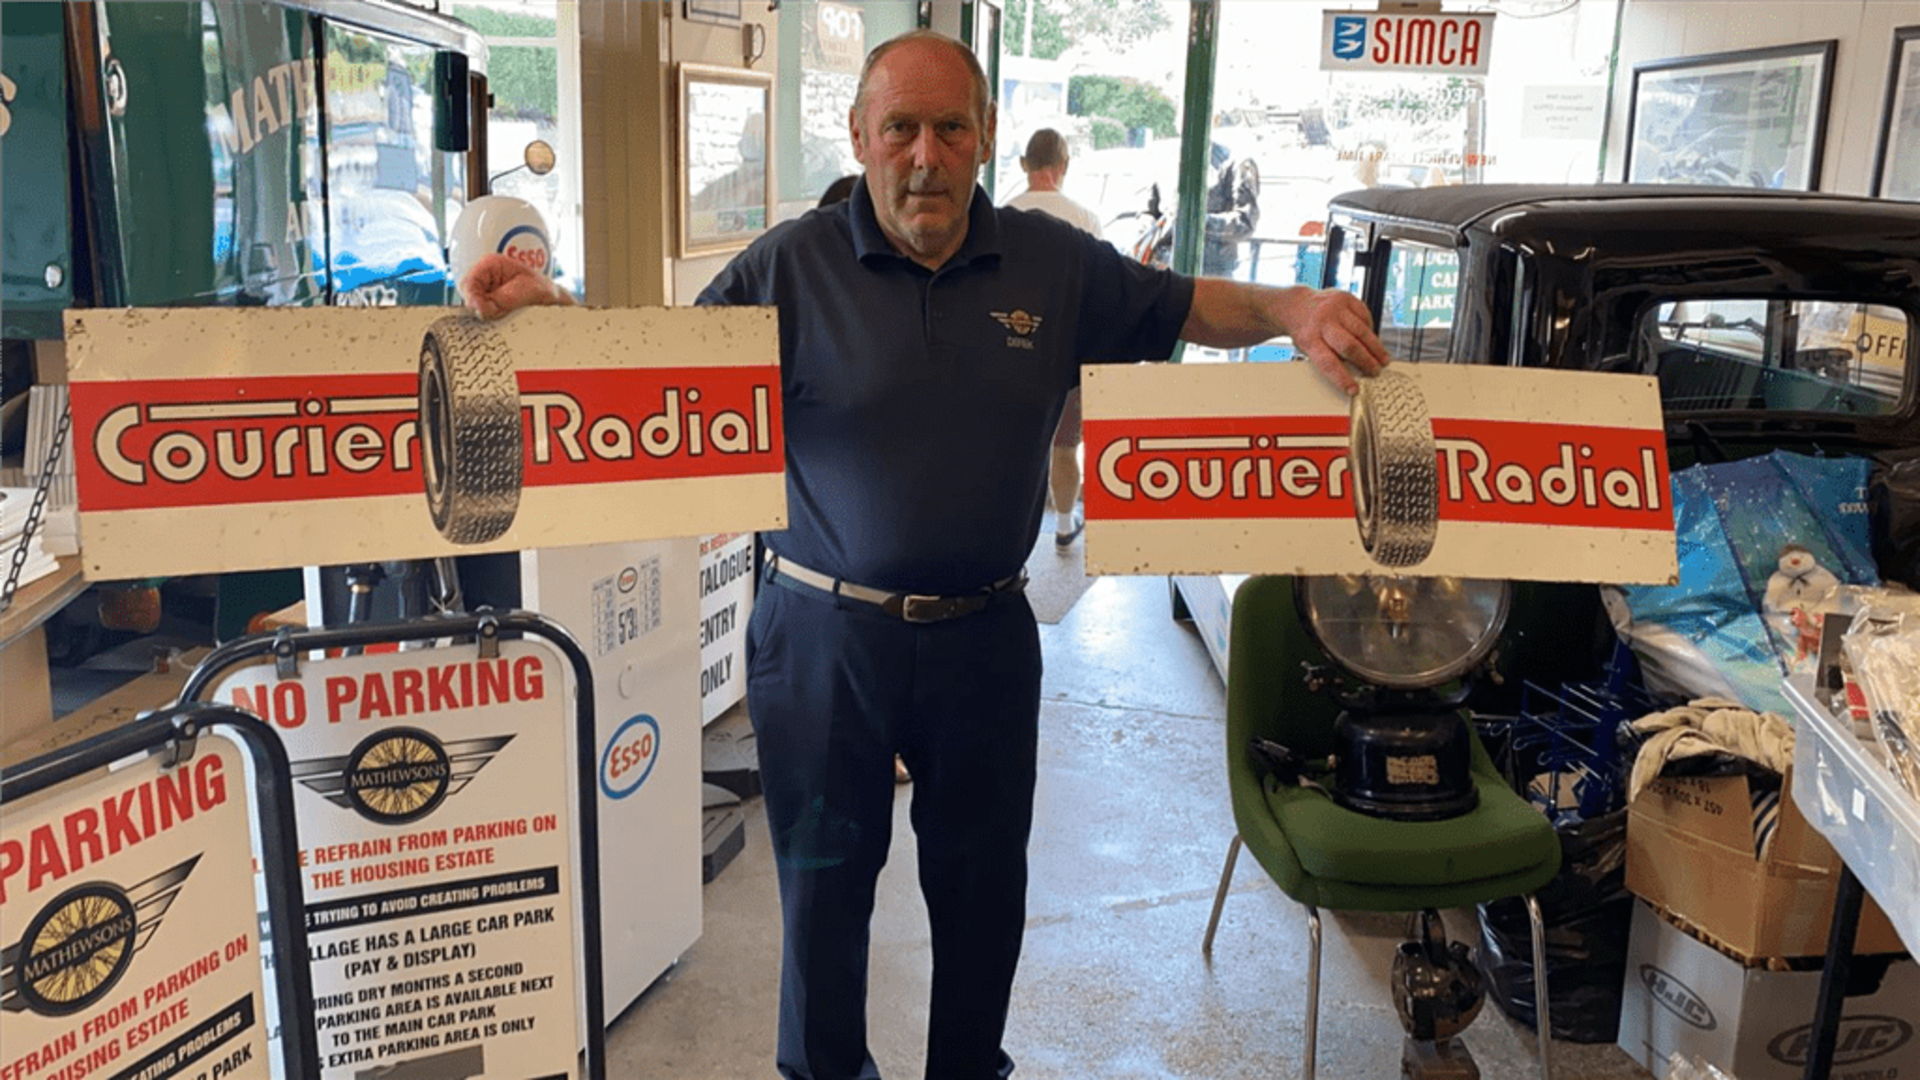 X2 COURIER RADIAL SIGNS